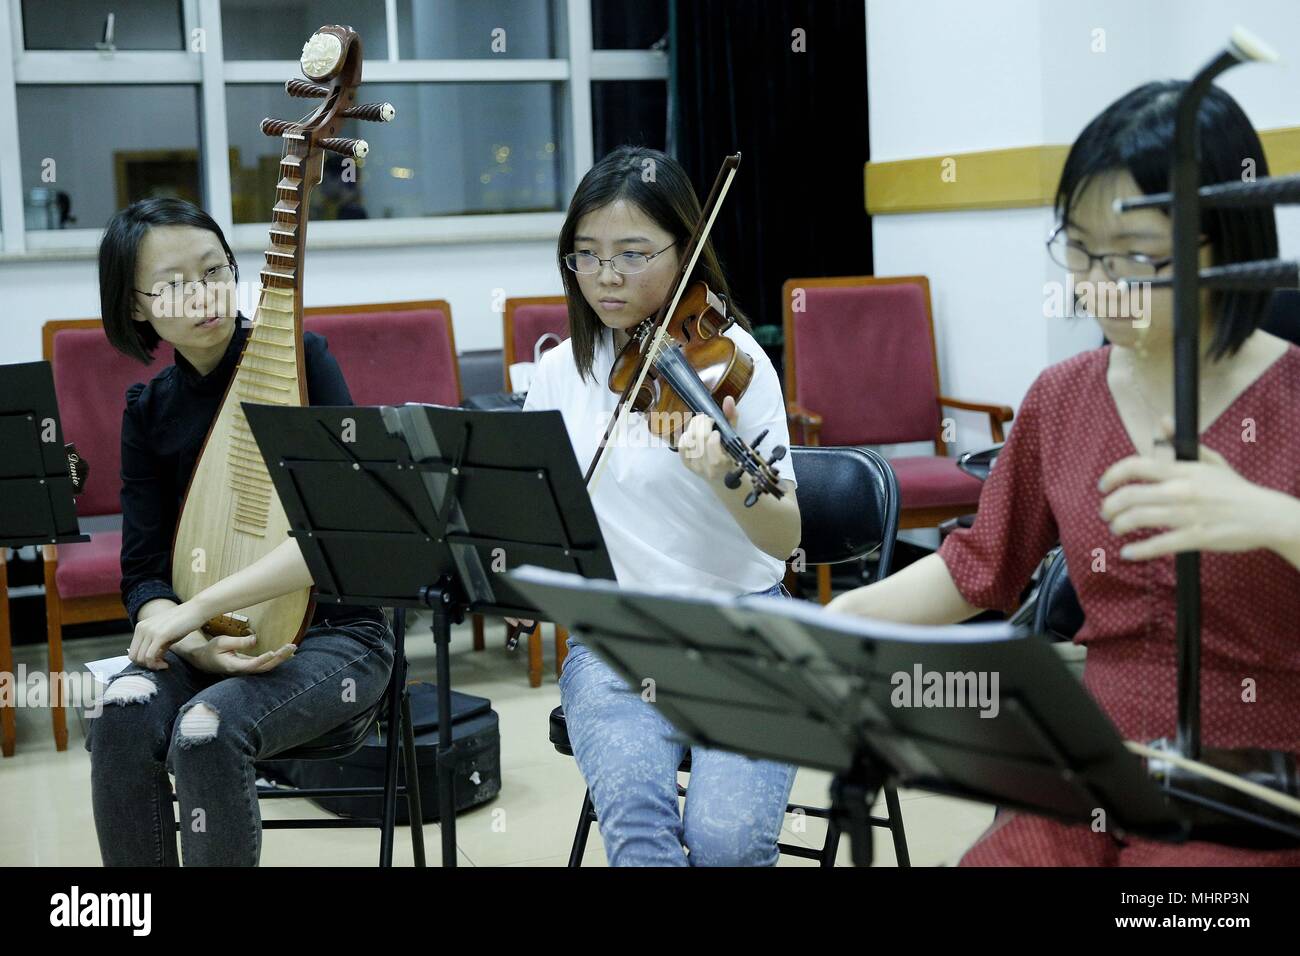 (180503) -- BEIJING, May 3, 2018 (Xinhua) - Medical student He Yumiao (C) and fellow members of the 'Xieyun' orchestra attend a rehearsal at Peking Union Medical College (PUMC) in Beijing, capital of China, May 2, 2018. In 2015, Peking Union Medical College Hospital doctors and PUMC students launched the 'Xieyun' orchestra. Every month, members of 'Xieyun' would voluntarily stage one or two musical performances for patients, their families, and other medical workers. The orchestra was widely appreciated by its audiences for its performances and the members' concern and love for the patients. Stock Photo